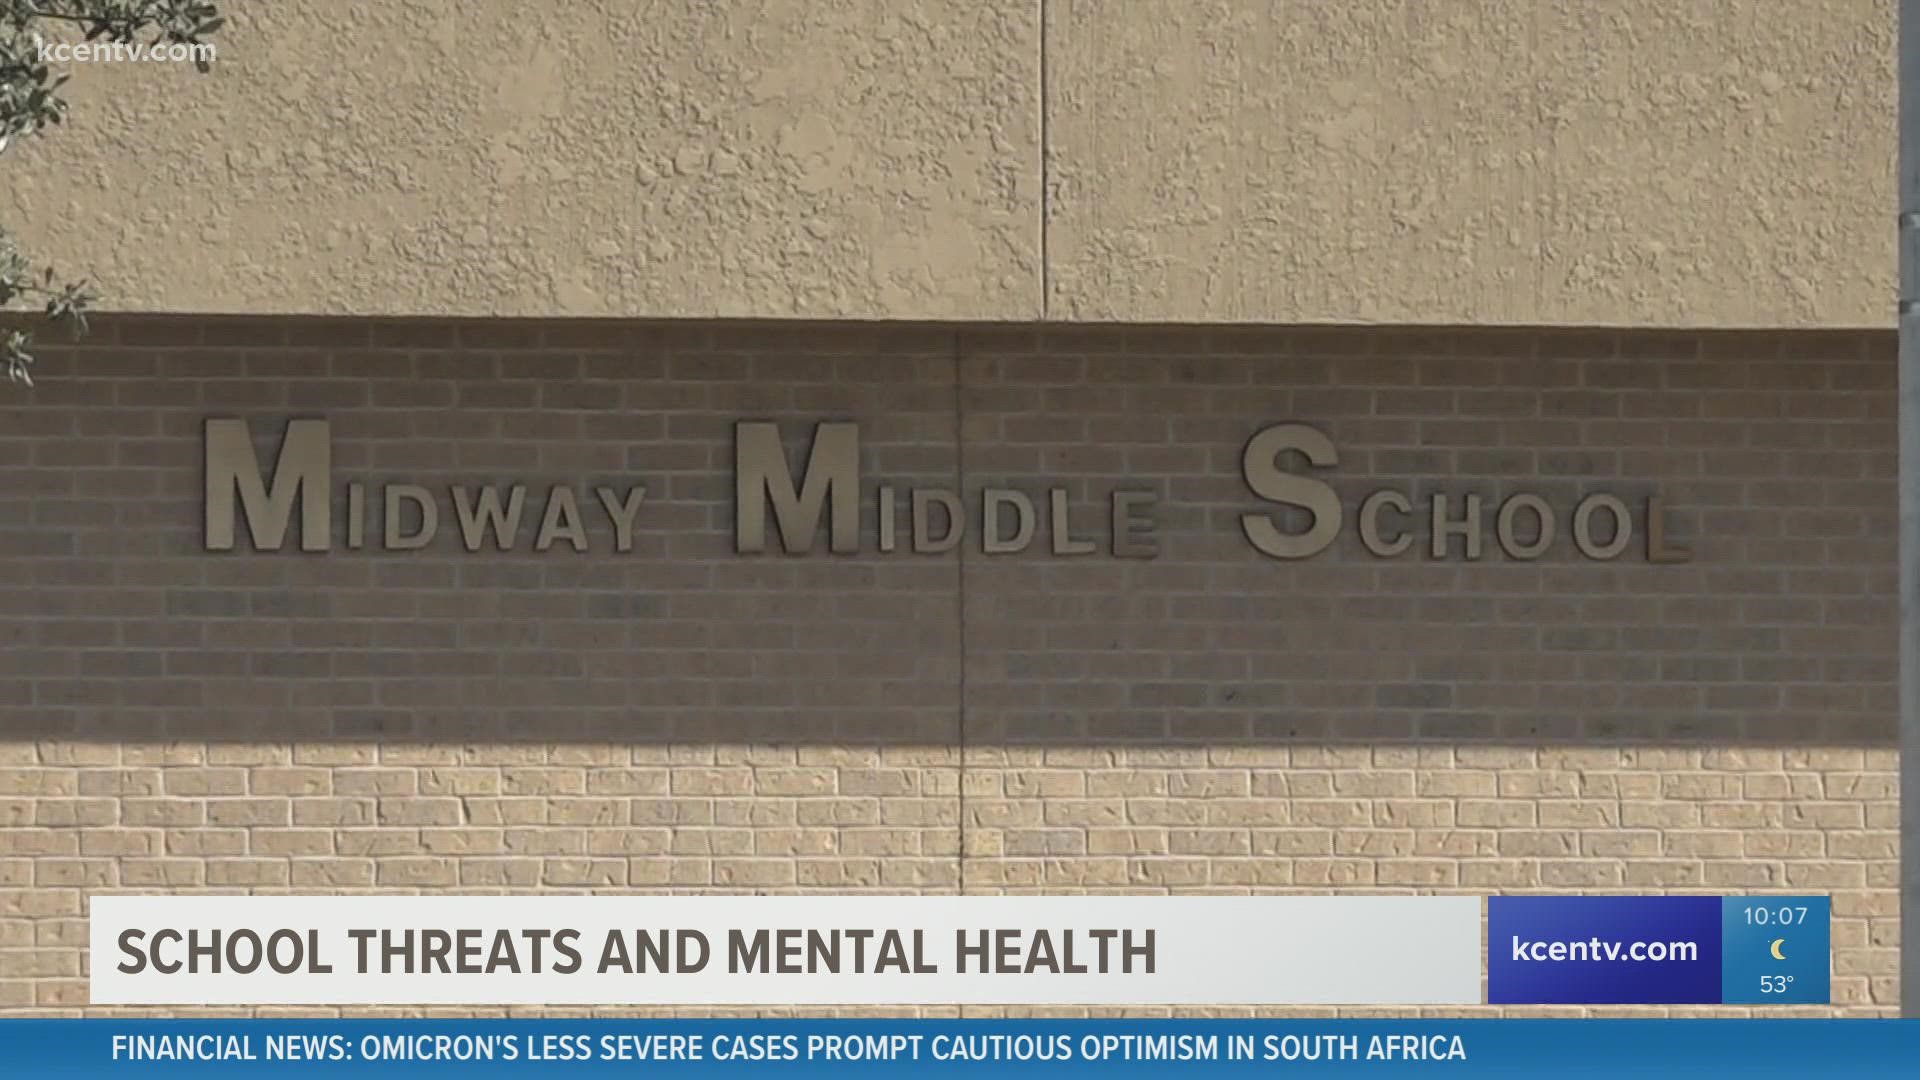 An unexpected, false lockdown alarm and 9-1-1 call left students at Midway Middle School feeling like they were in danger. Now they're dealing with the aftermath.